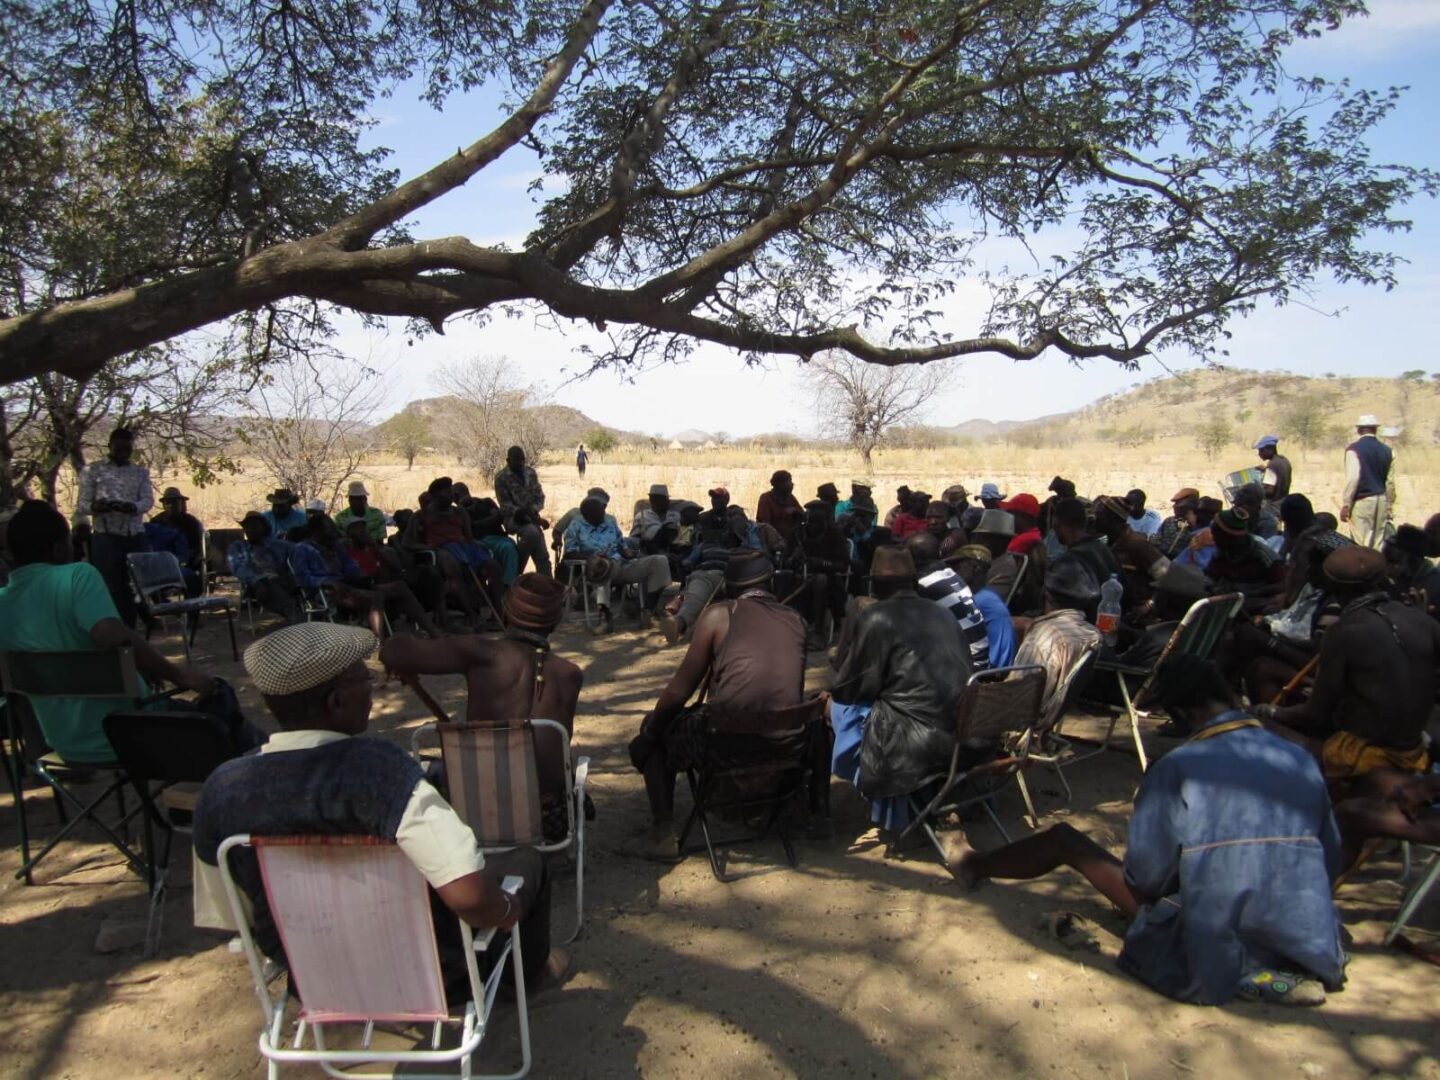 A meeting of the Himba people in the north of Namibia